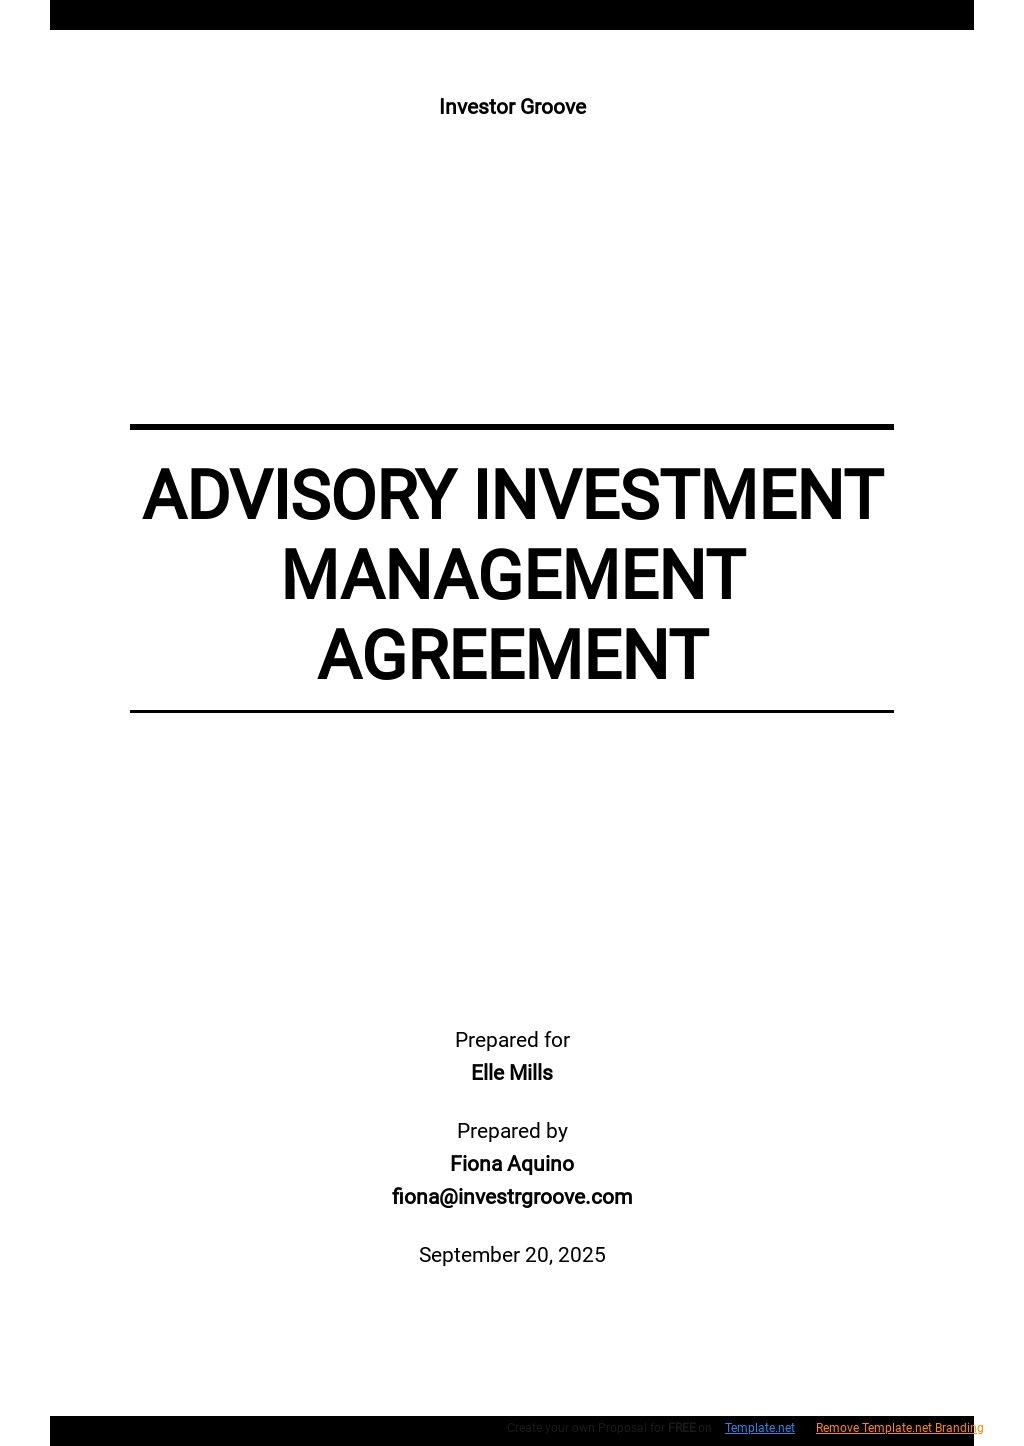 Advisory Investment Management Agreement Template